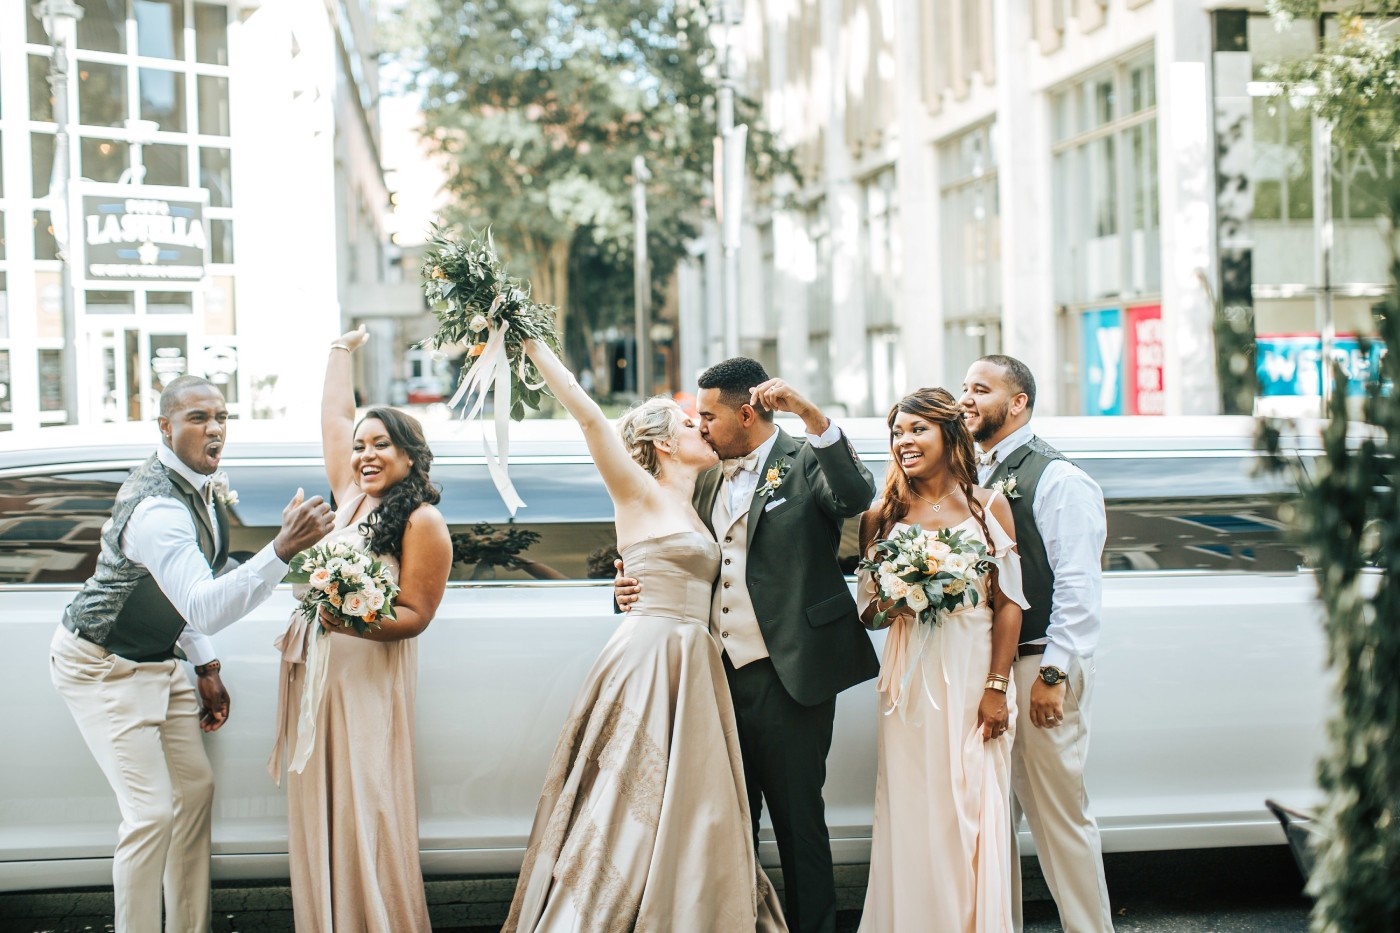 Grab the Best Package for Wedding Limo Transportation NYC Now